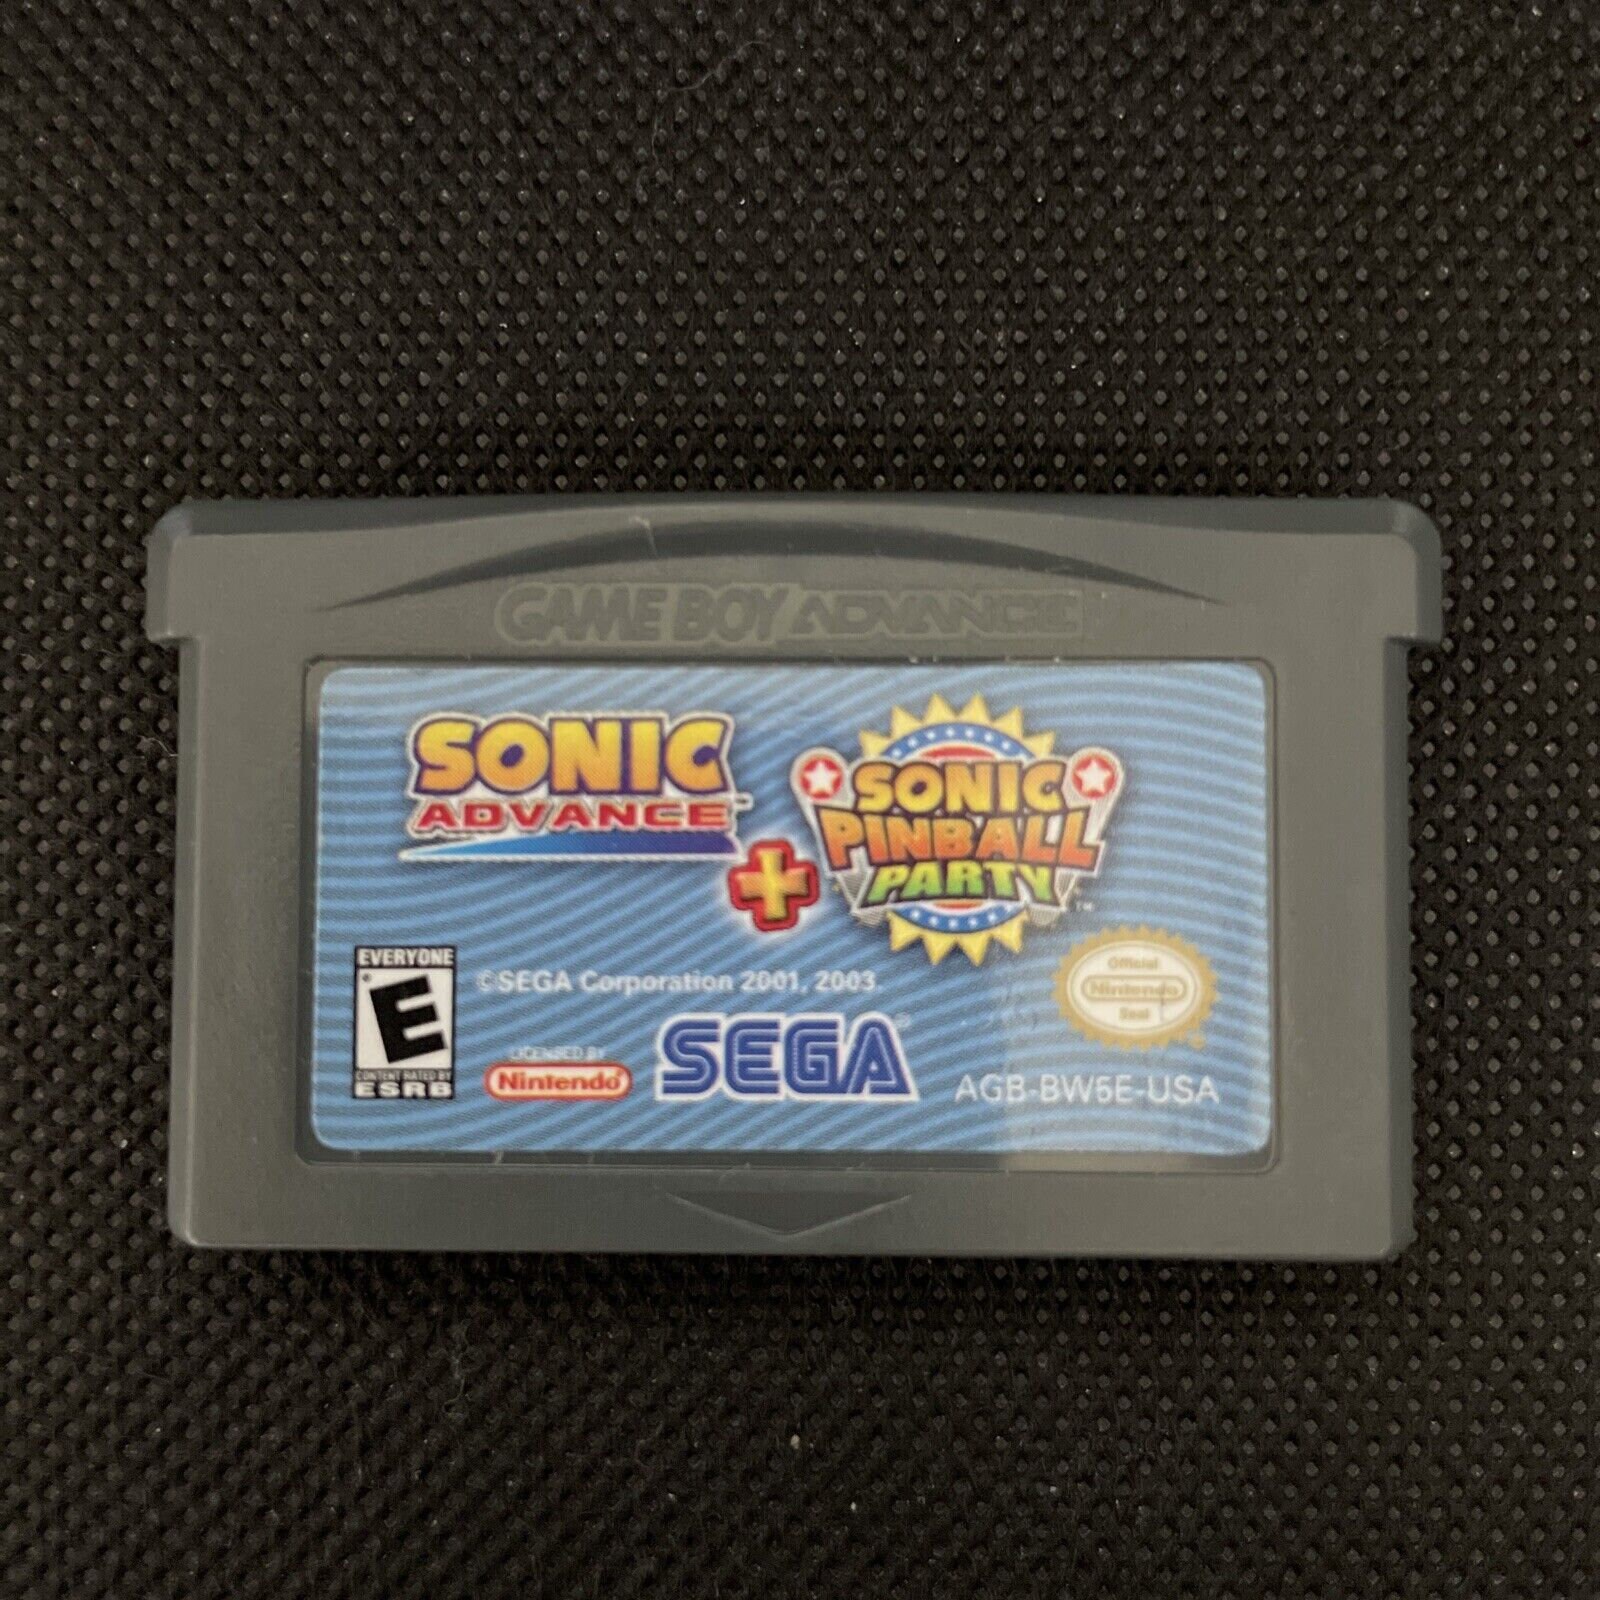 Sonic Pinball Party (Nintendo Game Boy Advance, 2003) for sale online